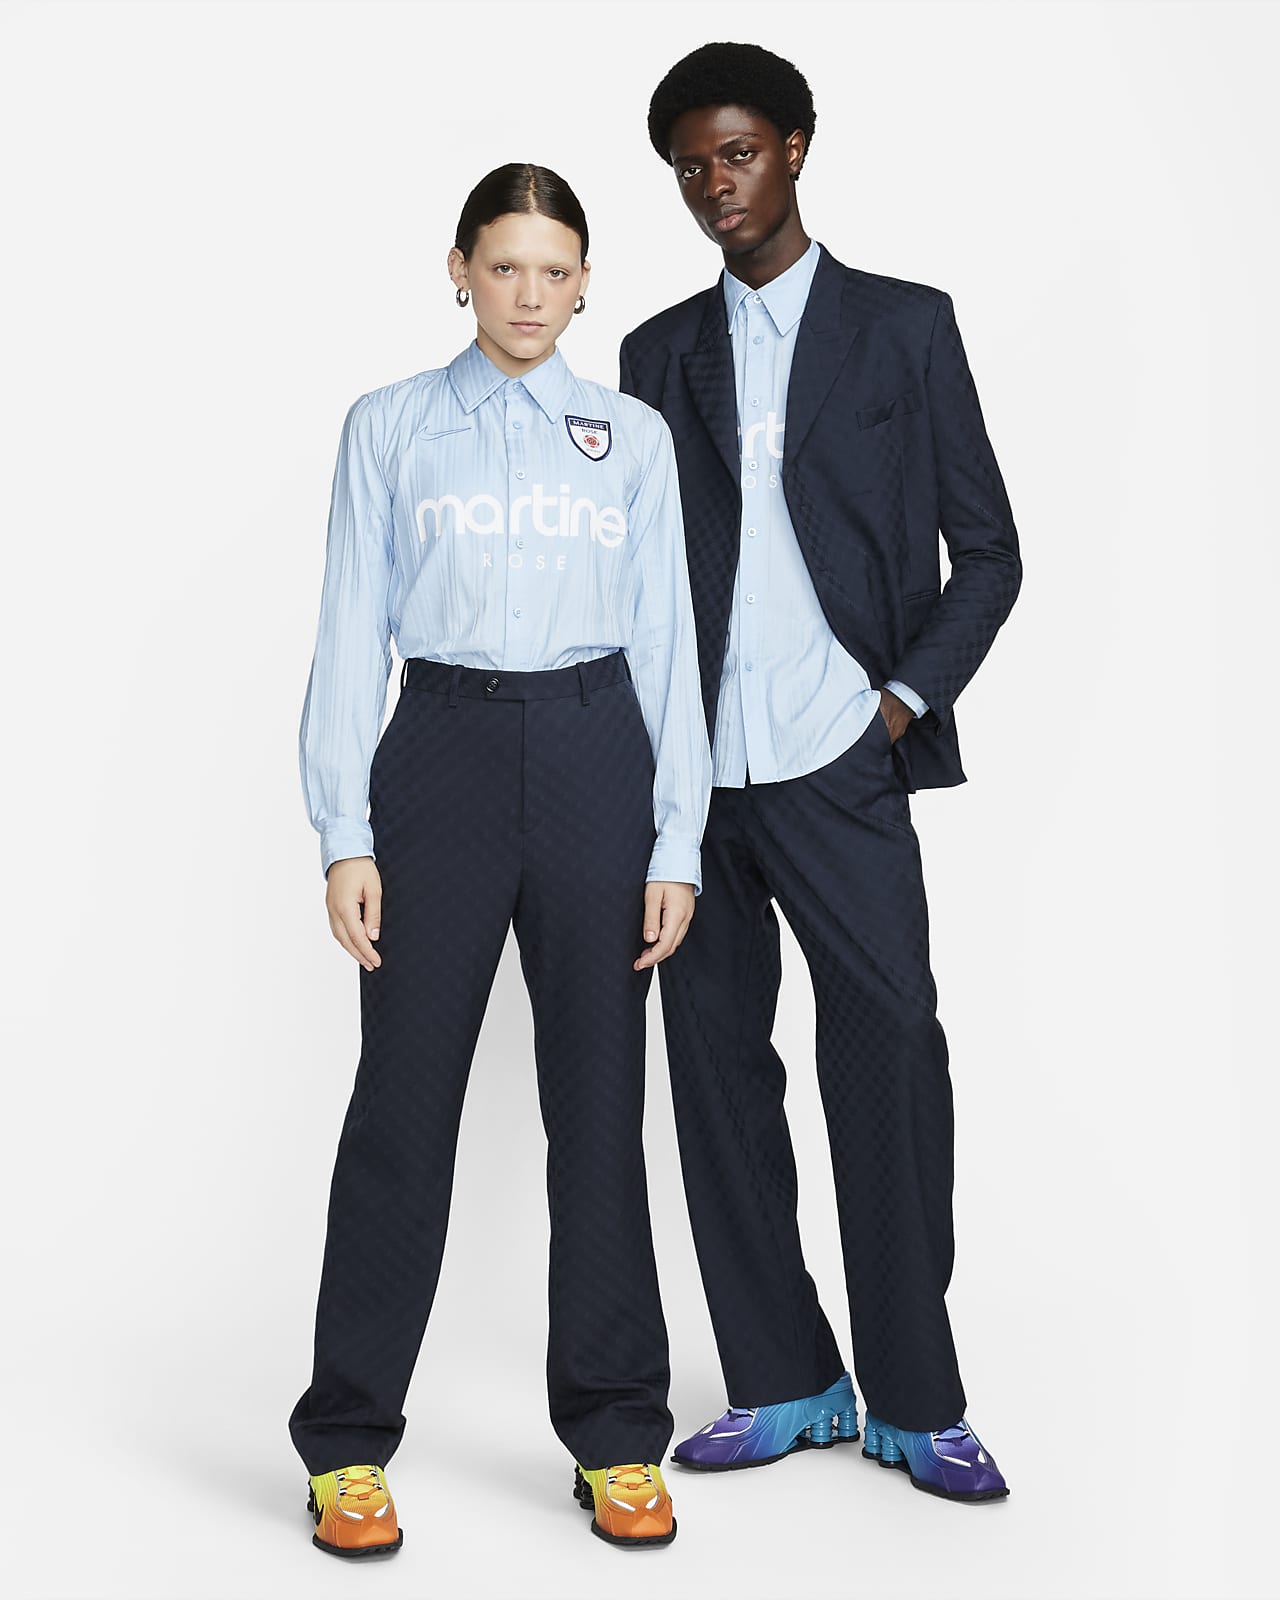 Nike Releases Debut Tailored Clothing Collection With Martine Rose